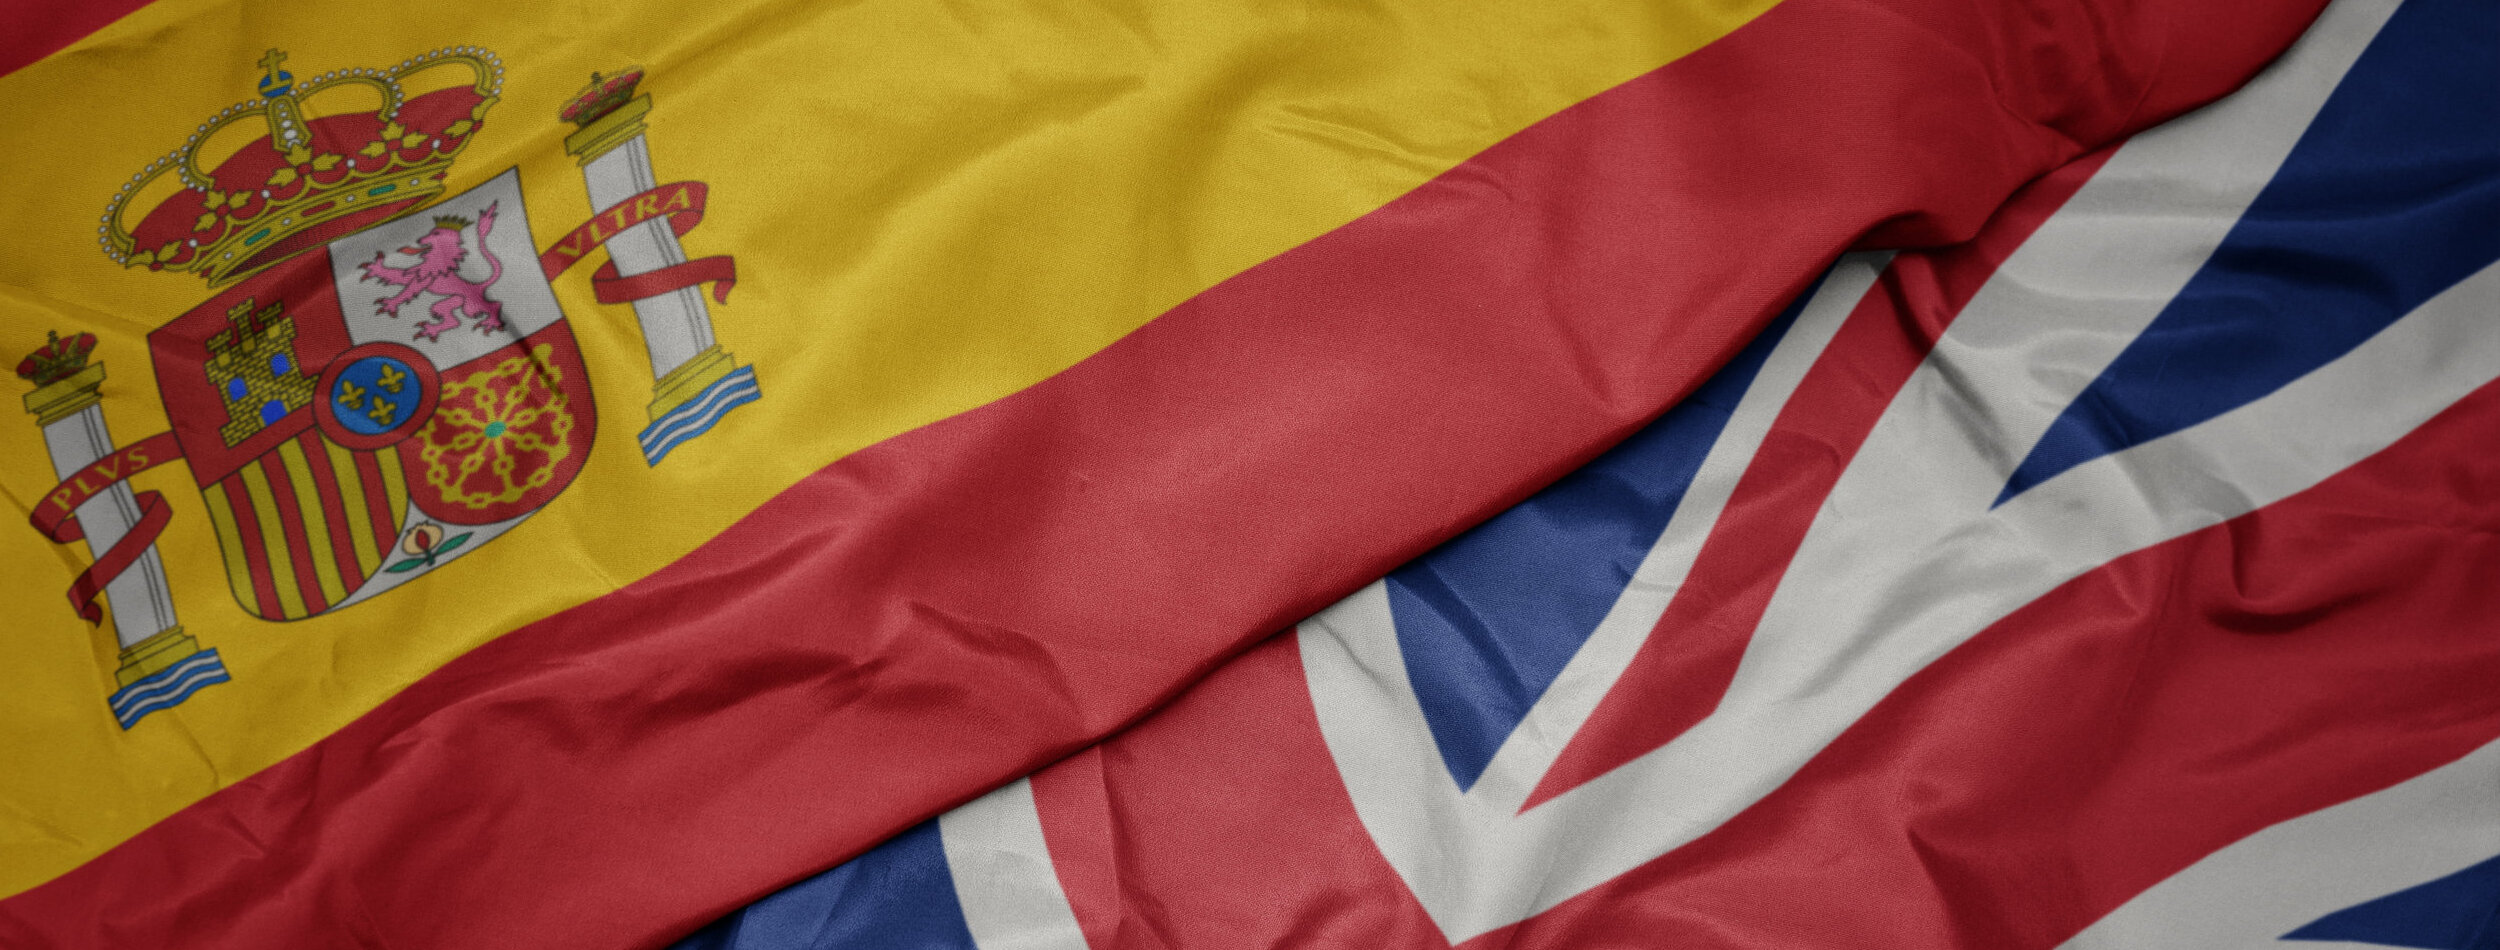 waving colorful flag of great britain and national flag of spain. macro